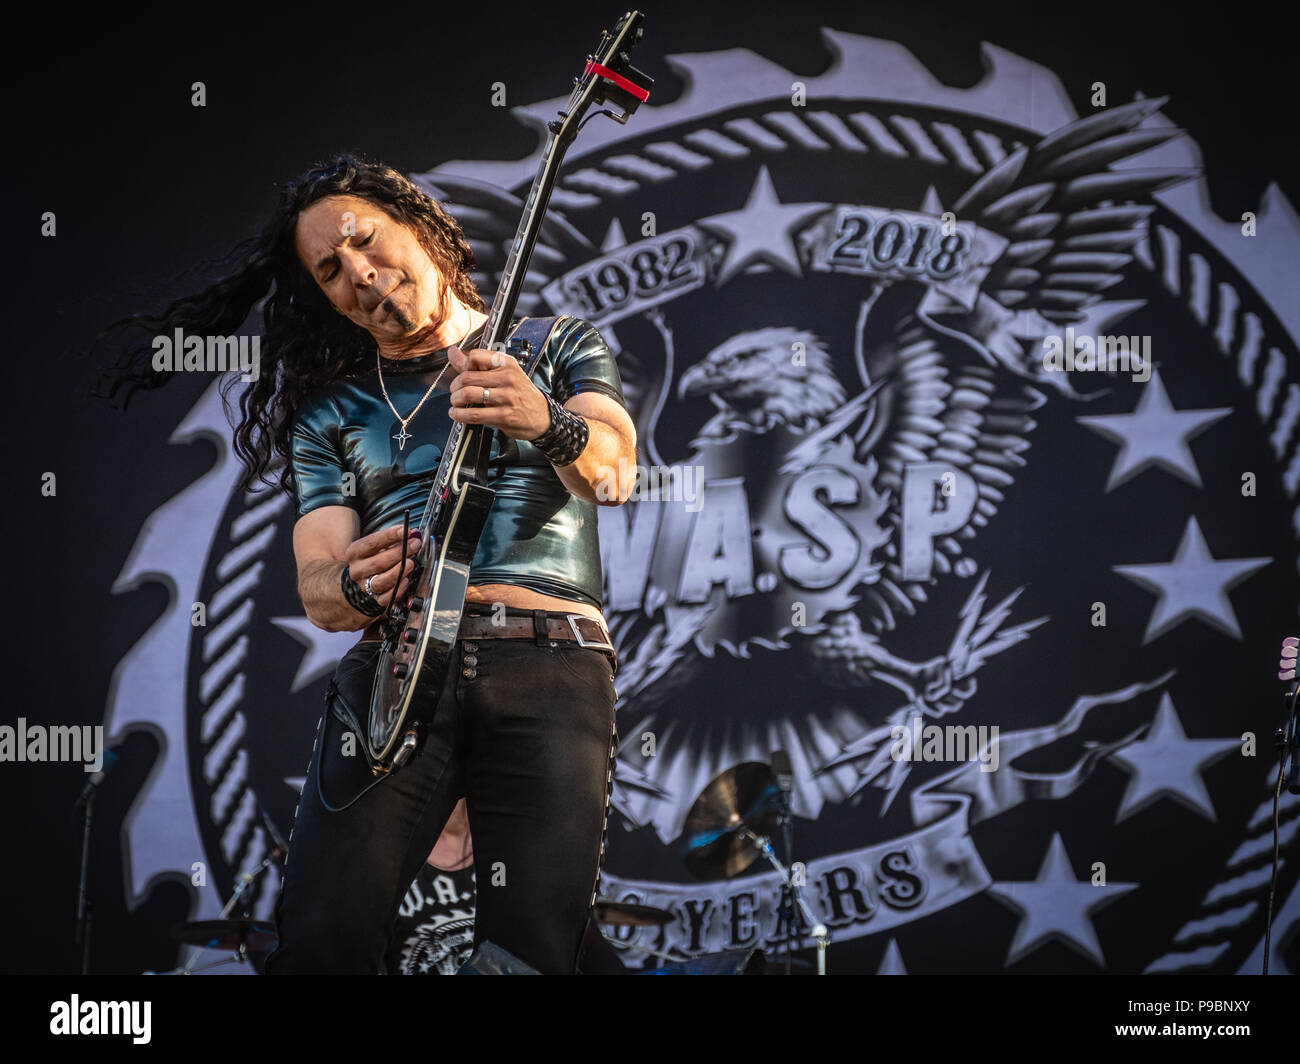 US-metal-rock band W.A.S.P. live on stage at the 2018 Copenhell Metal festival in Copenhagen, Denmark. Here guitarist Doug Blair. Stock Photo